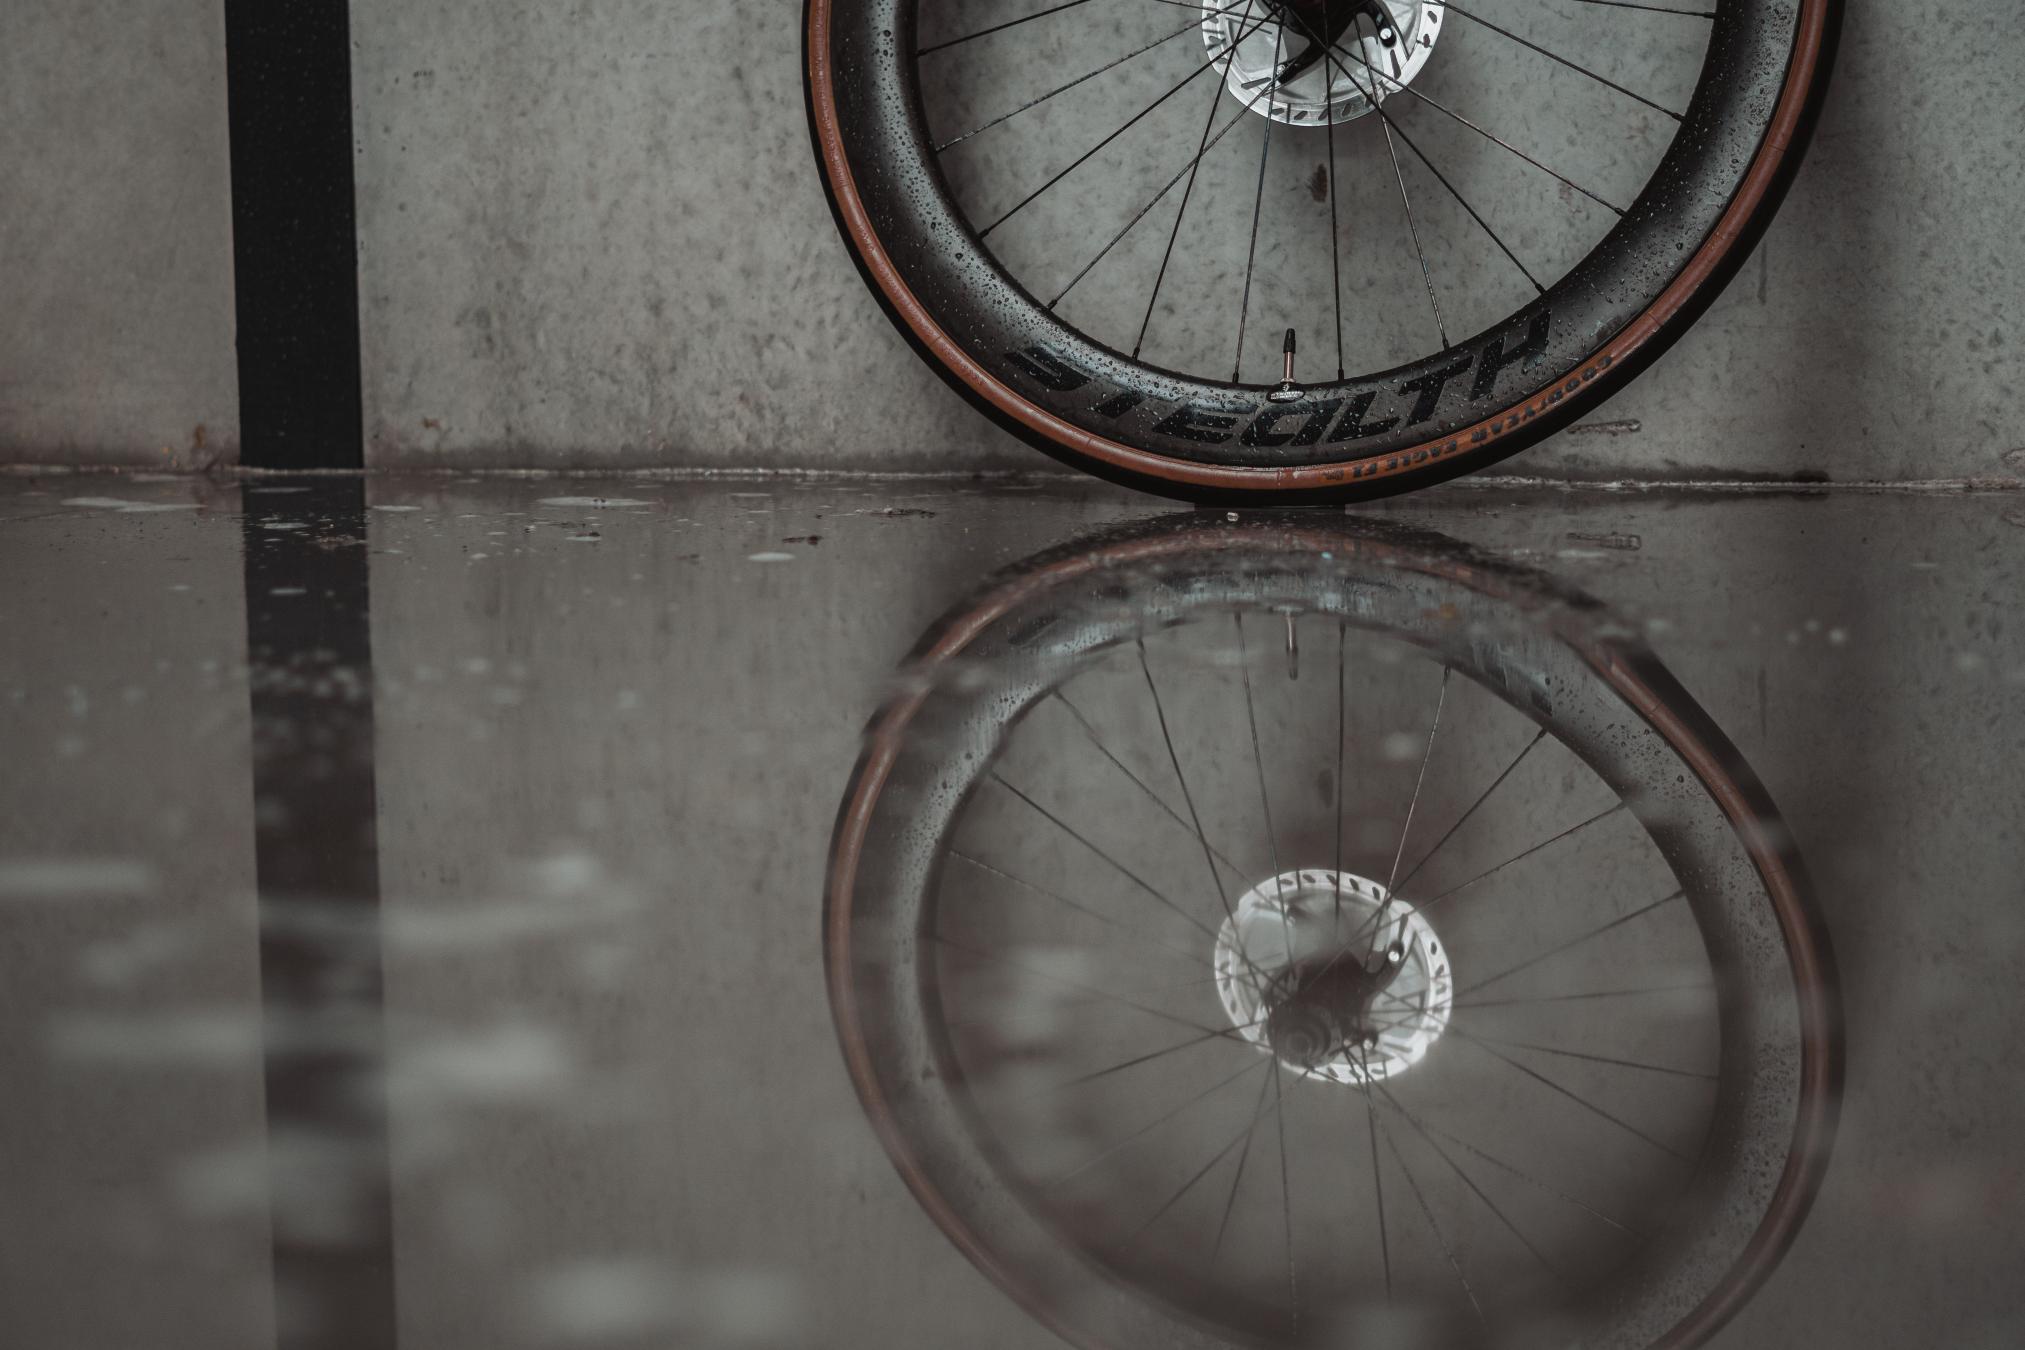 A wheel of a bike standing on wet ground.